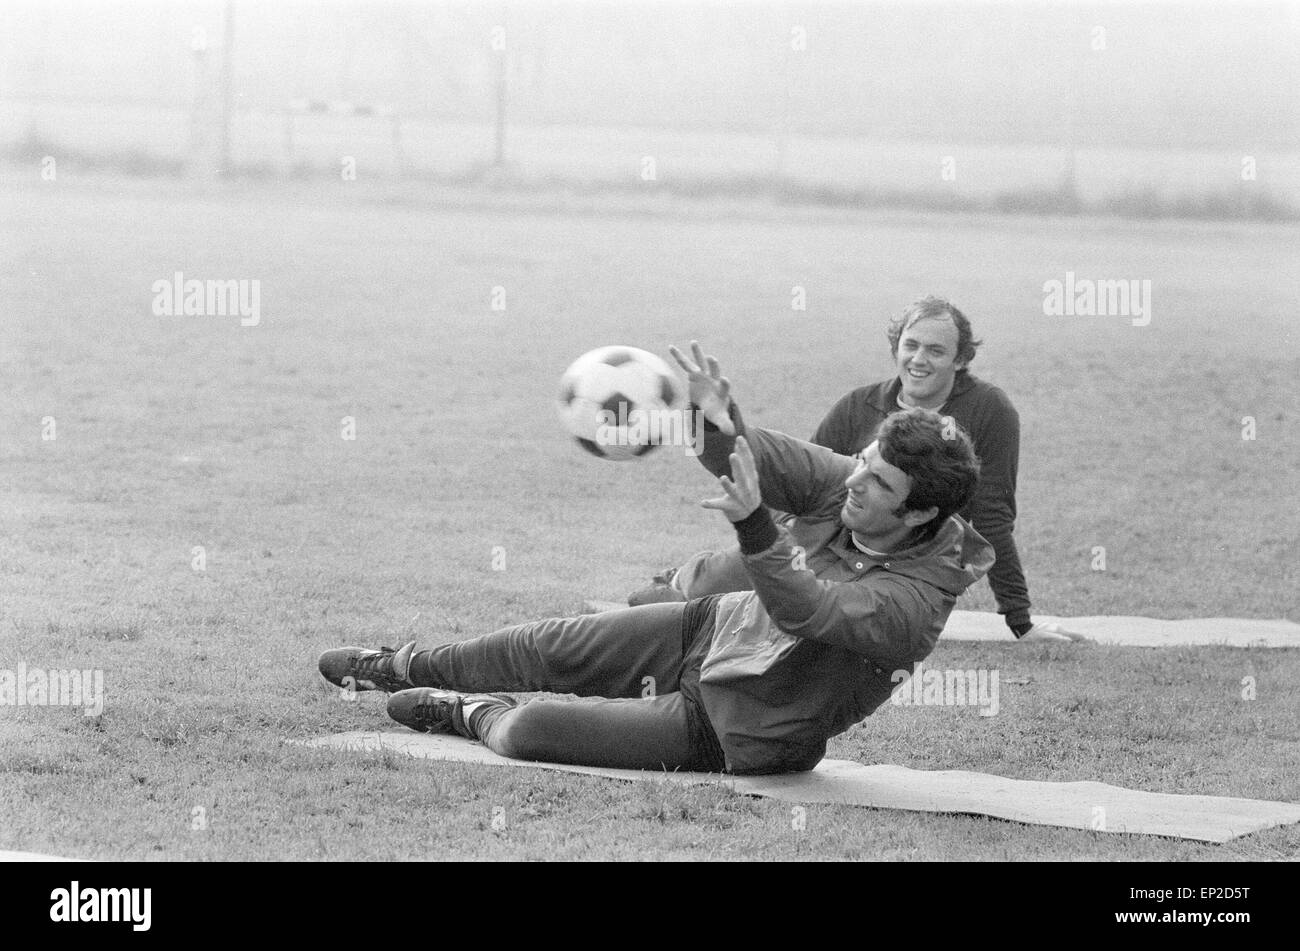 Dino Zoff, goalkeeper for Juventus, pictured during team training session in Turin, Italy, 10th November 1977. Stock Photo